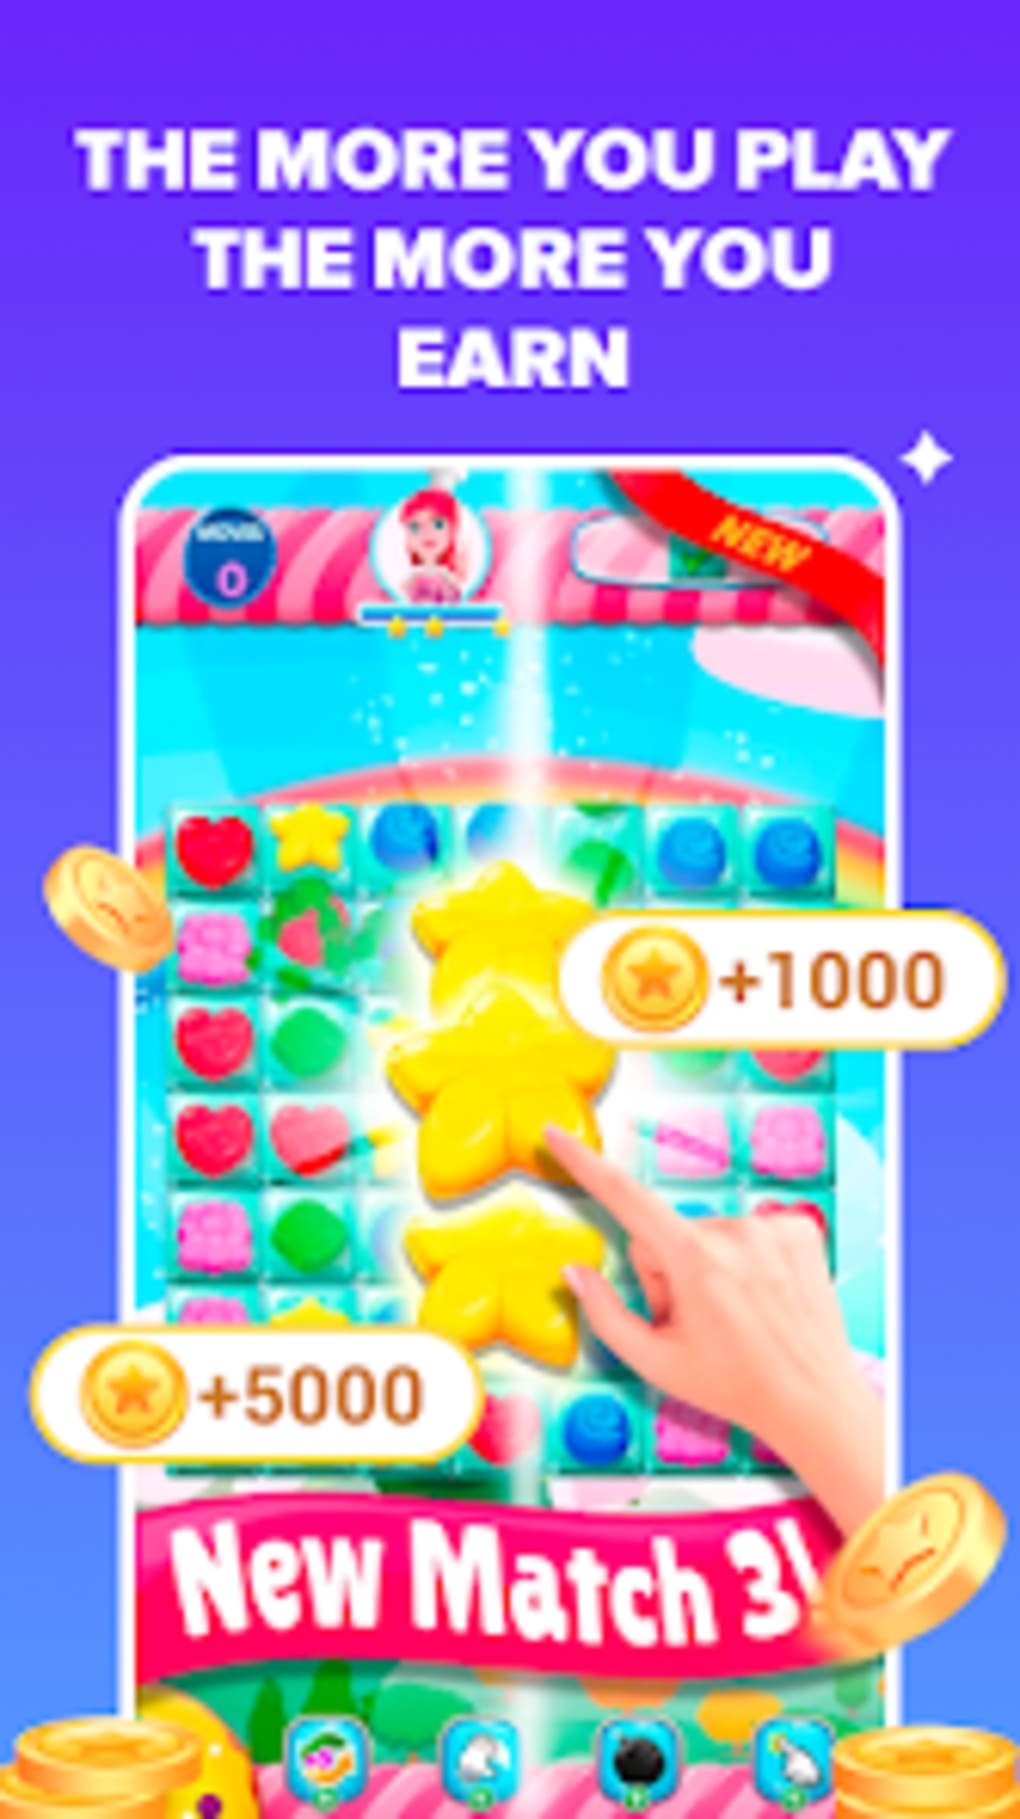 JOYit - Play Earn Money APK for Android - Download